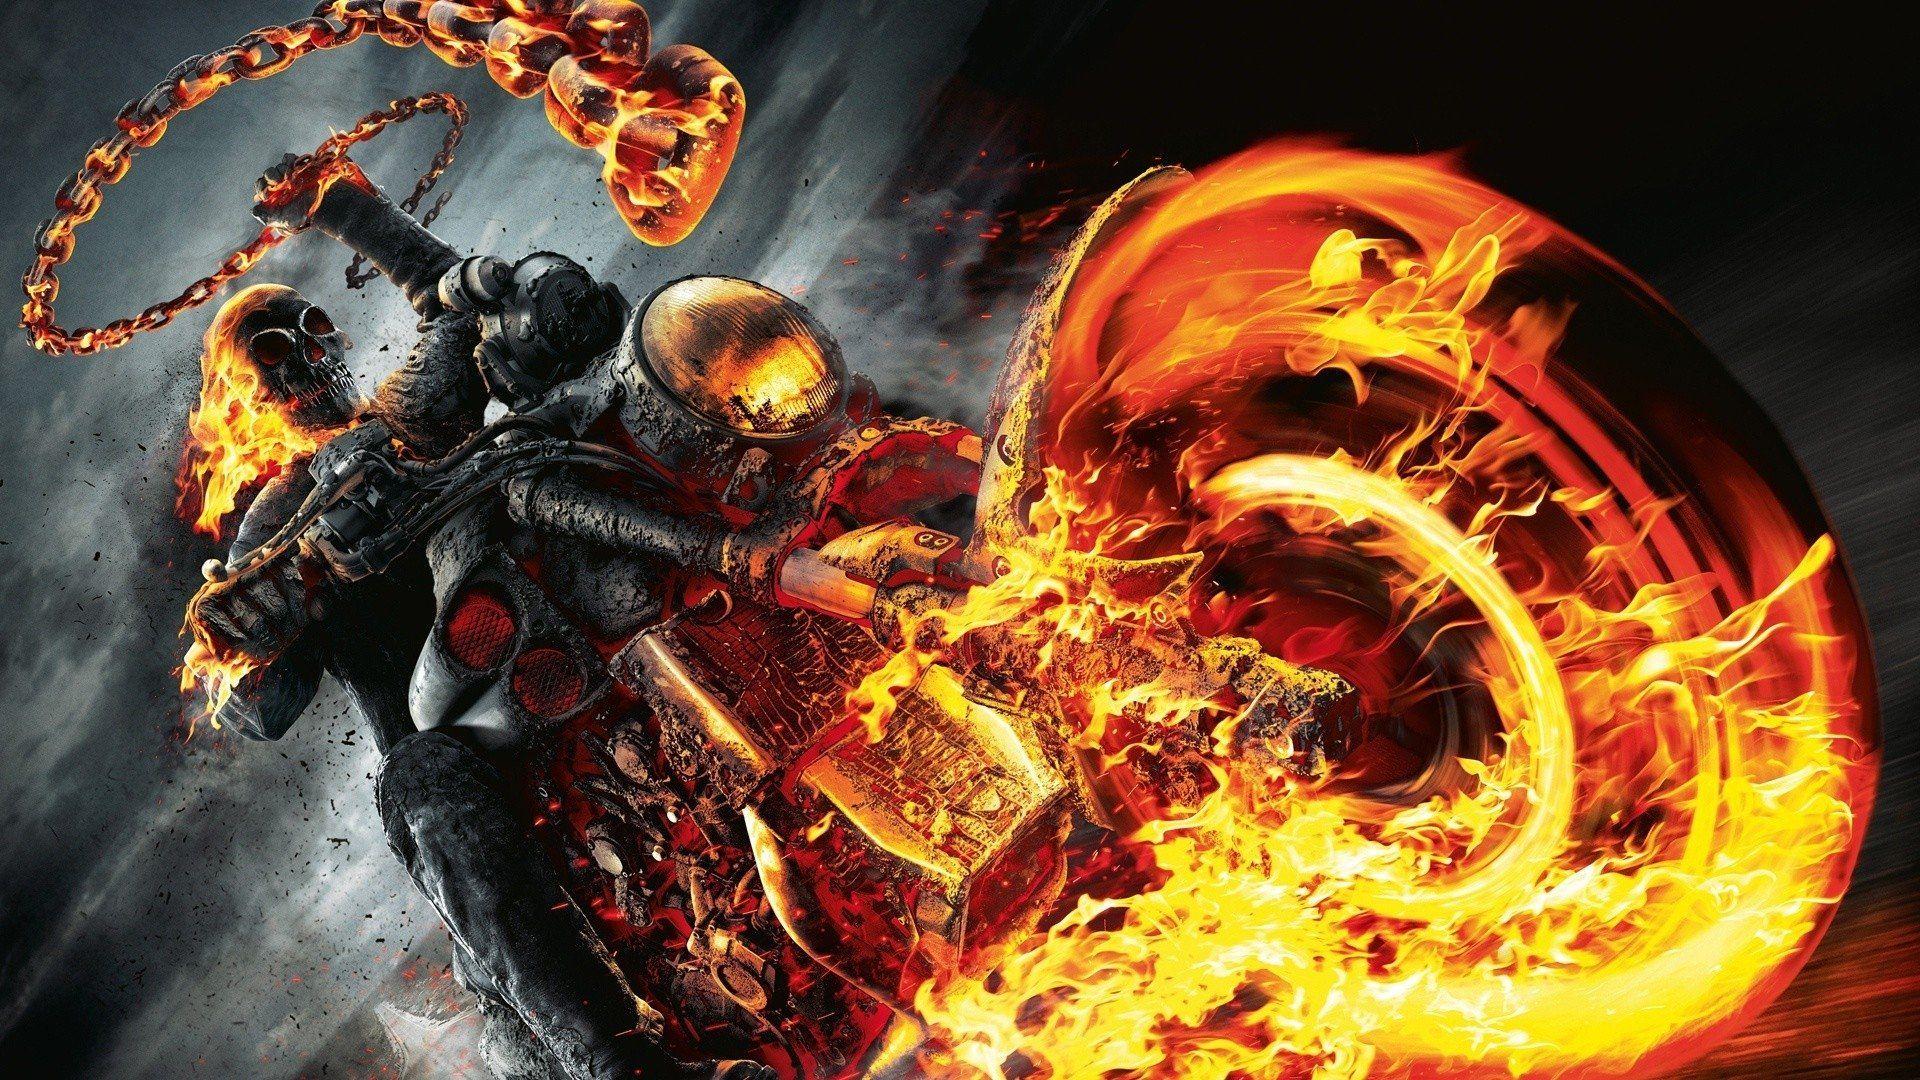 Ghost Rider Wallpapers - Top Free Ghost Rider Backgrounds - WallpaperAccess